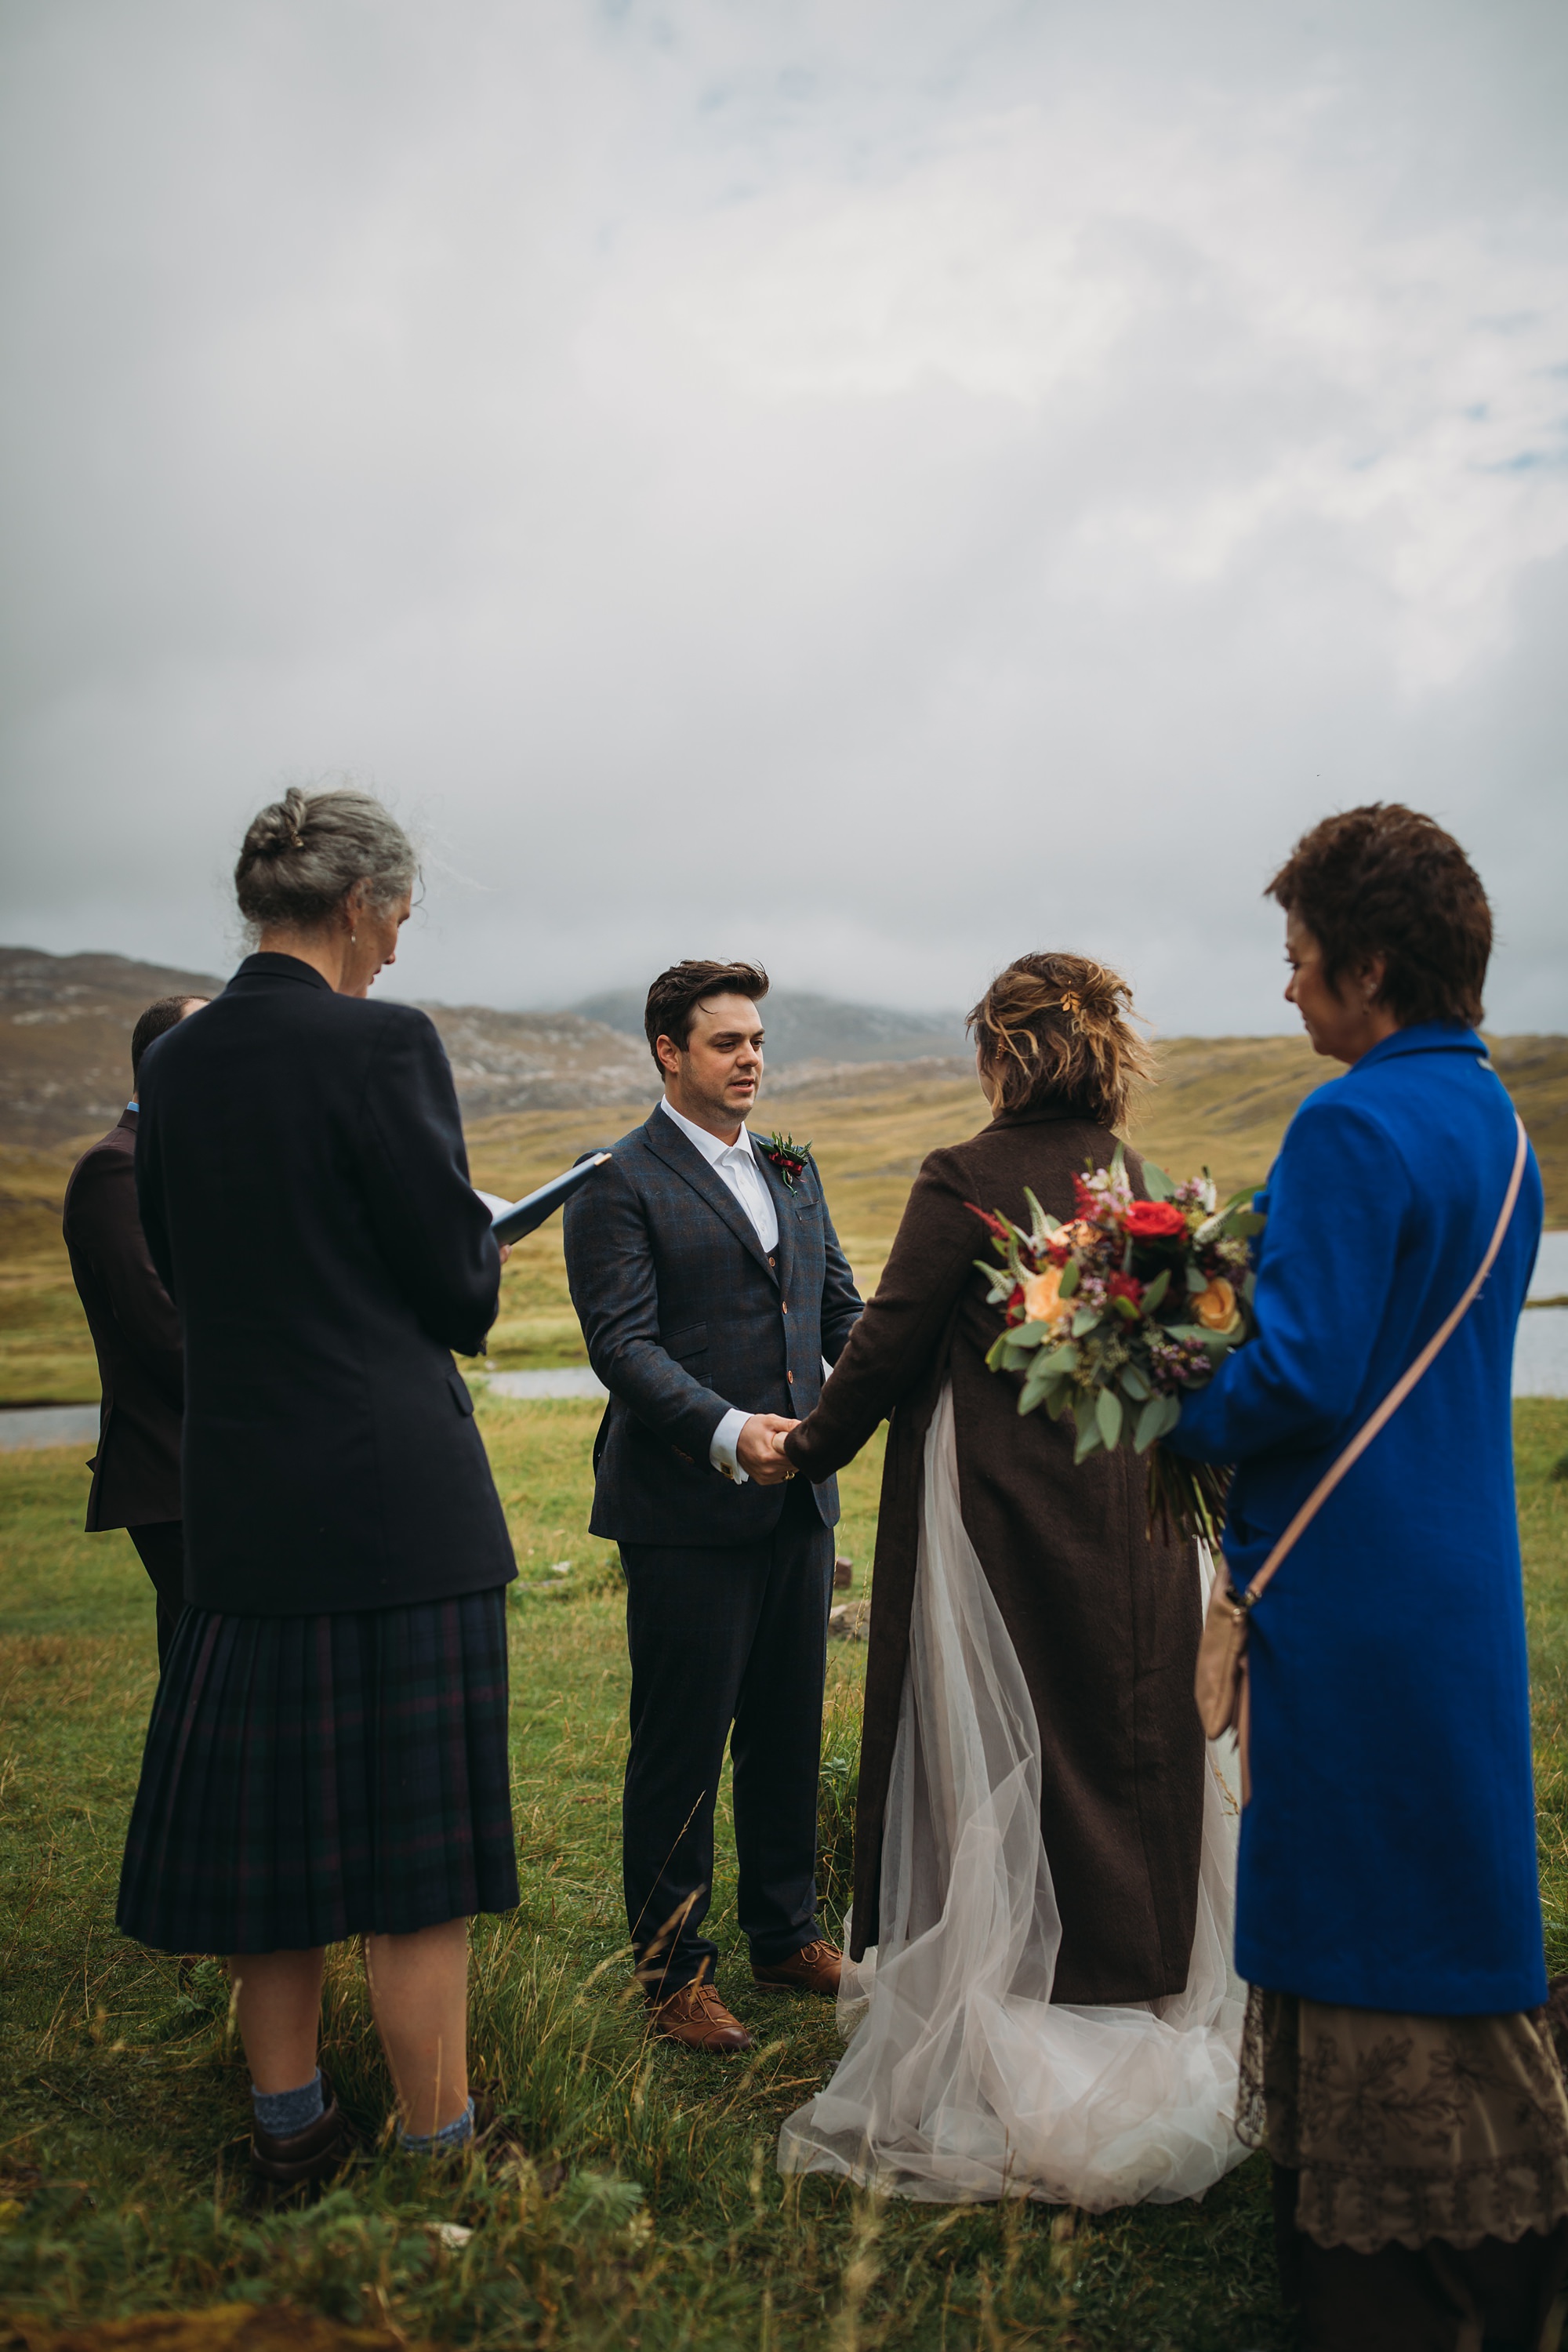 Eloping to Scotland at Lochinver and Ardvreck Castle. Civil ceremony on banks of a loch.